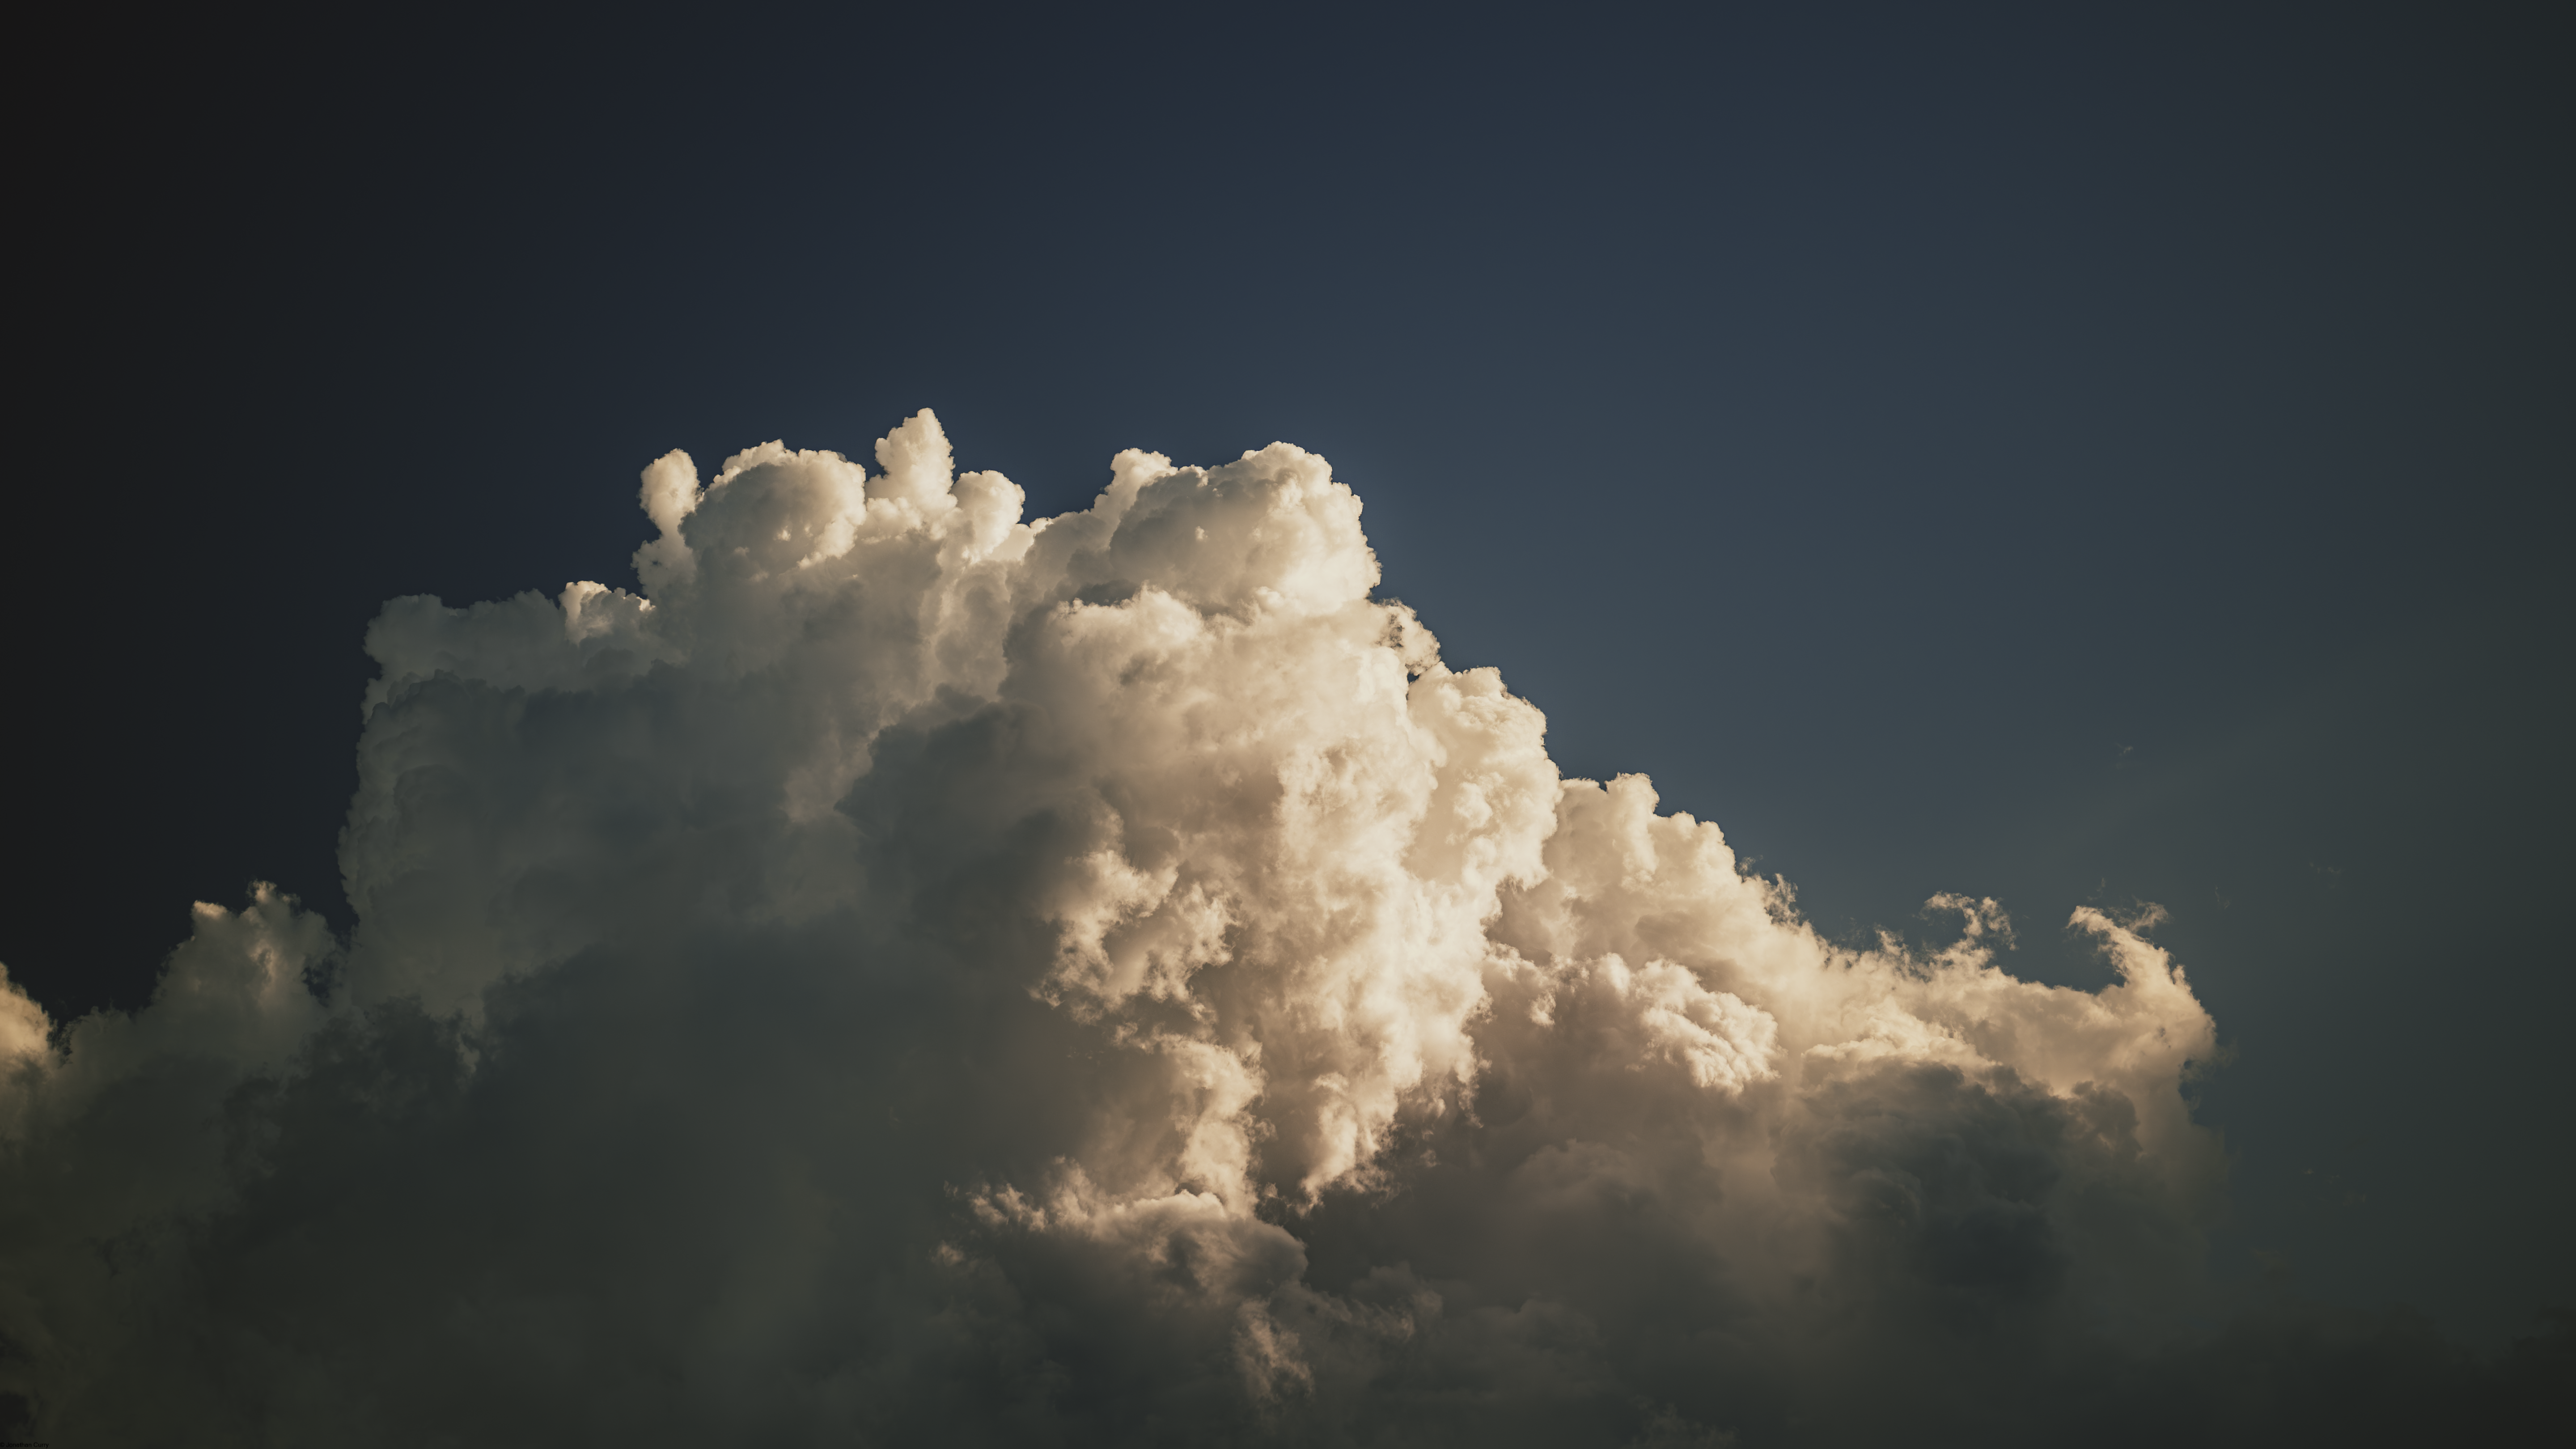 General 5760x3240 Jonathan Curry clouds outdoors nature landscape sky photography fantastic realism